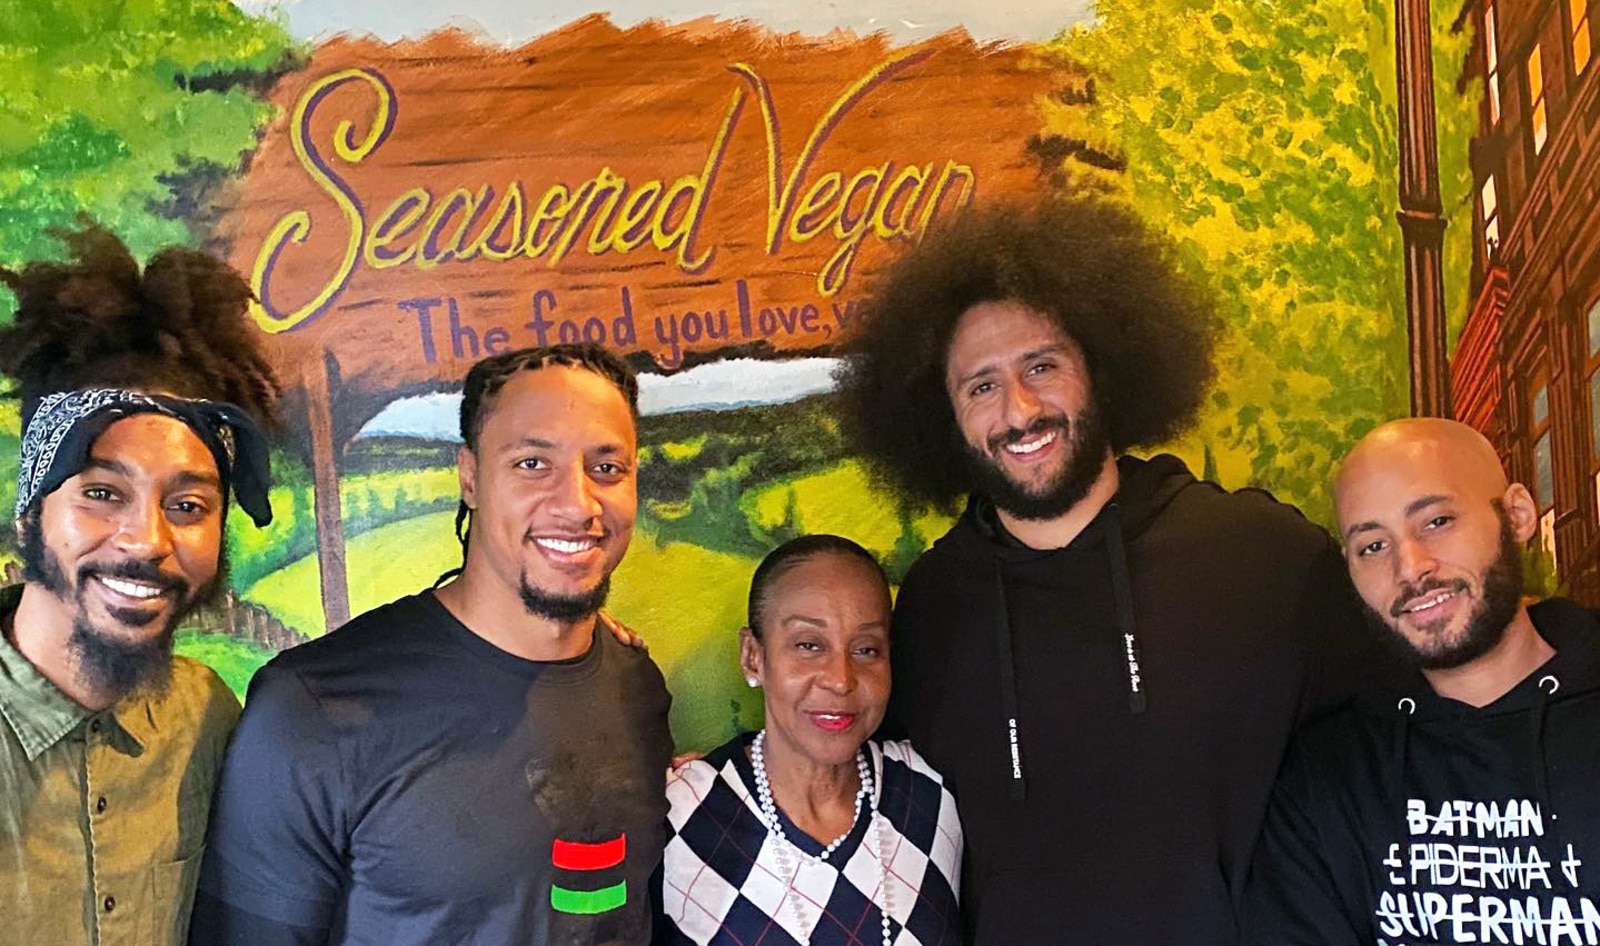 Black-Owned Vegan Restaurants Win $25,000 from Discover Card